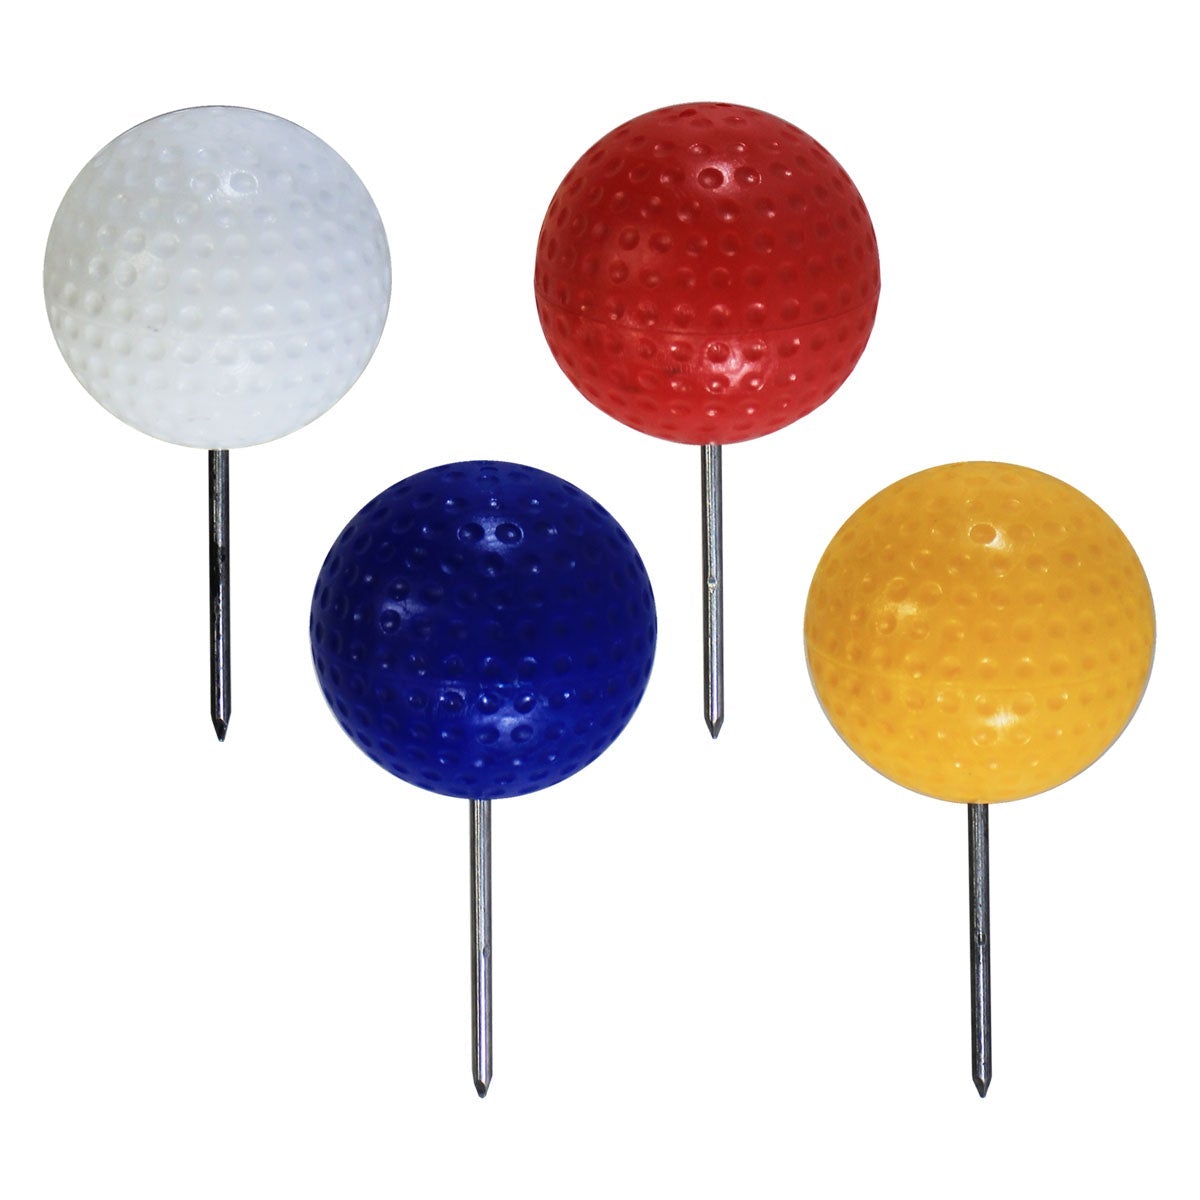 Premium 18 Hole Golf Package Set - FREE Shipping!